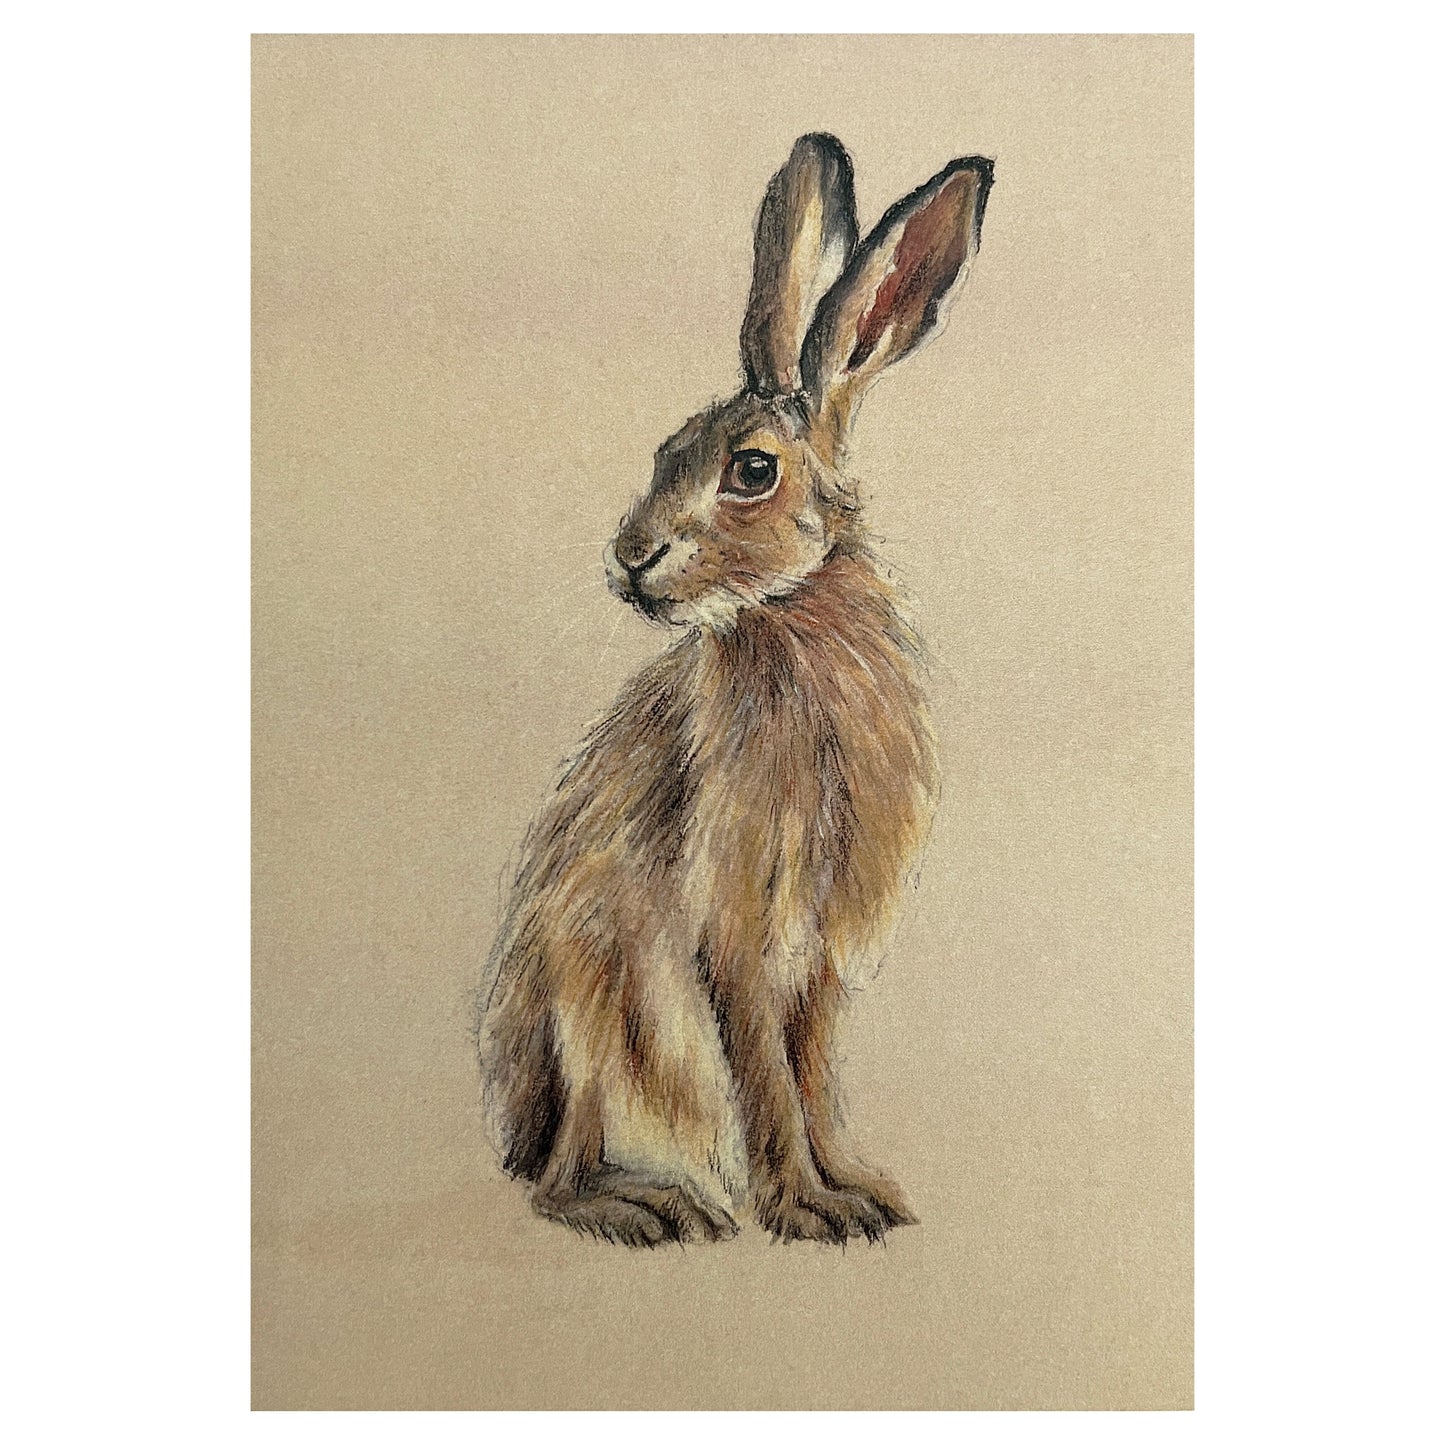 "Seated Hare" Signed Limited Edition Giclée Print